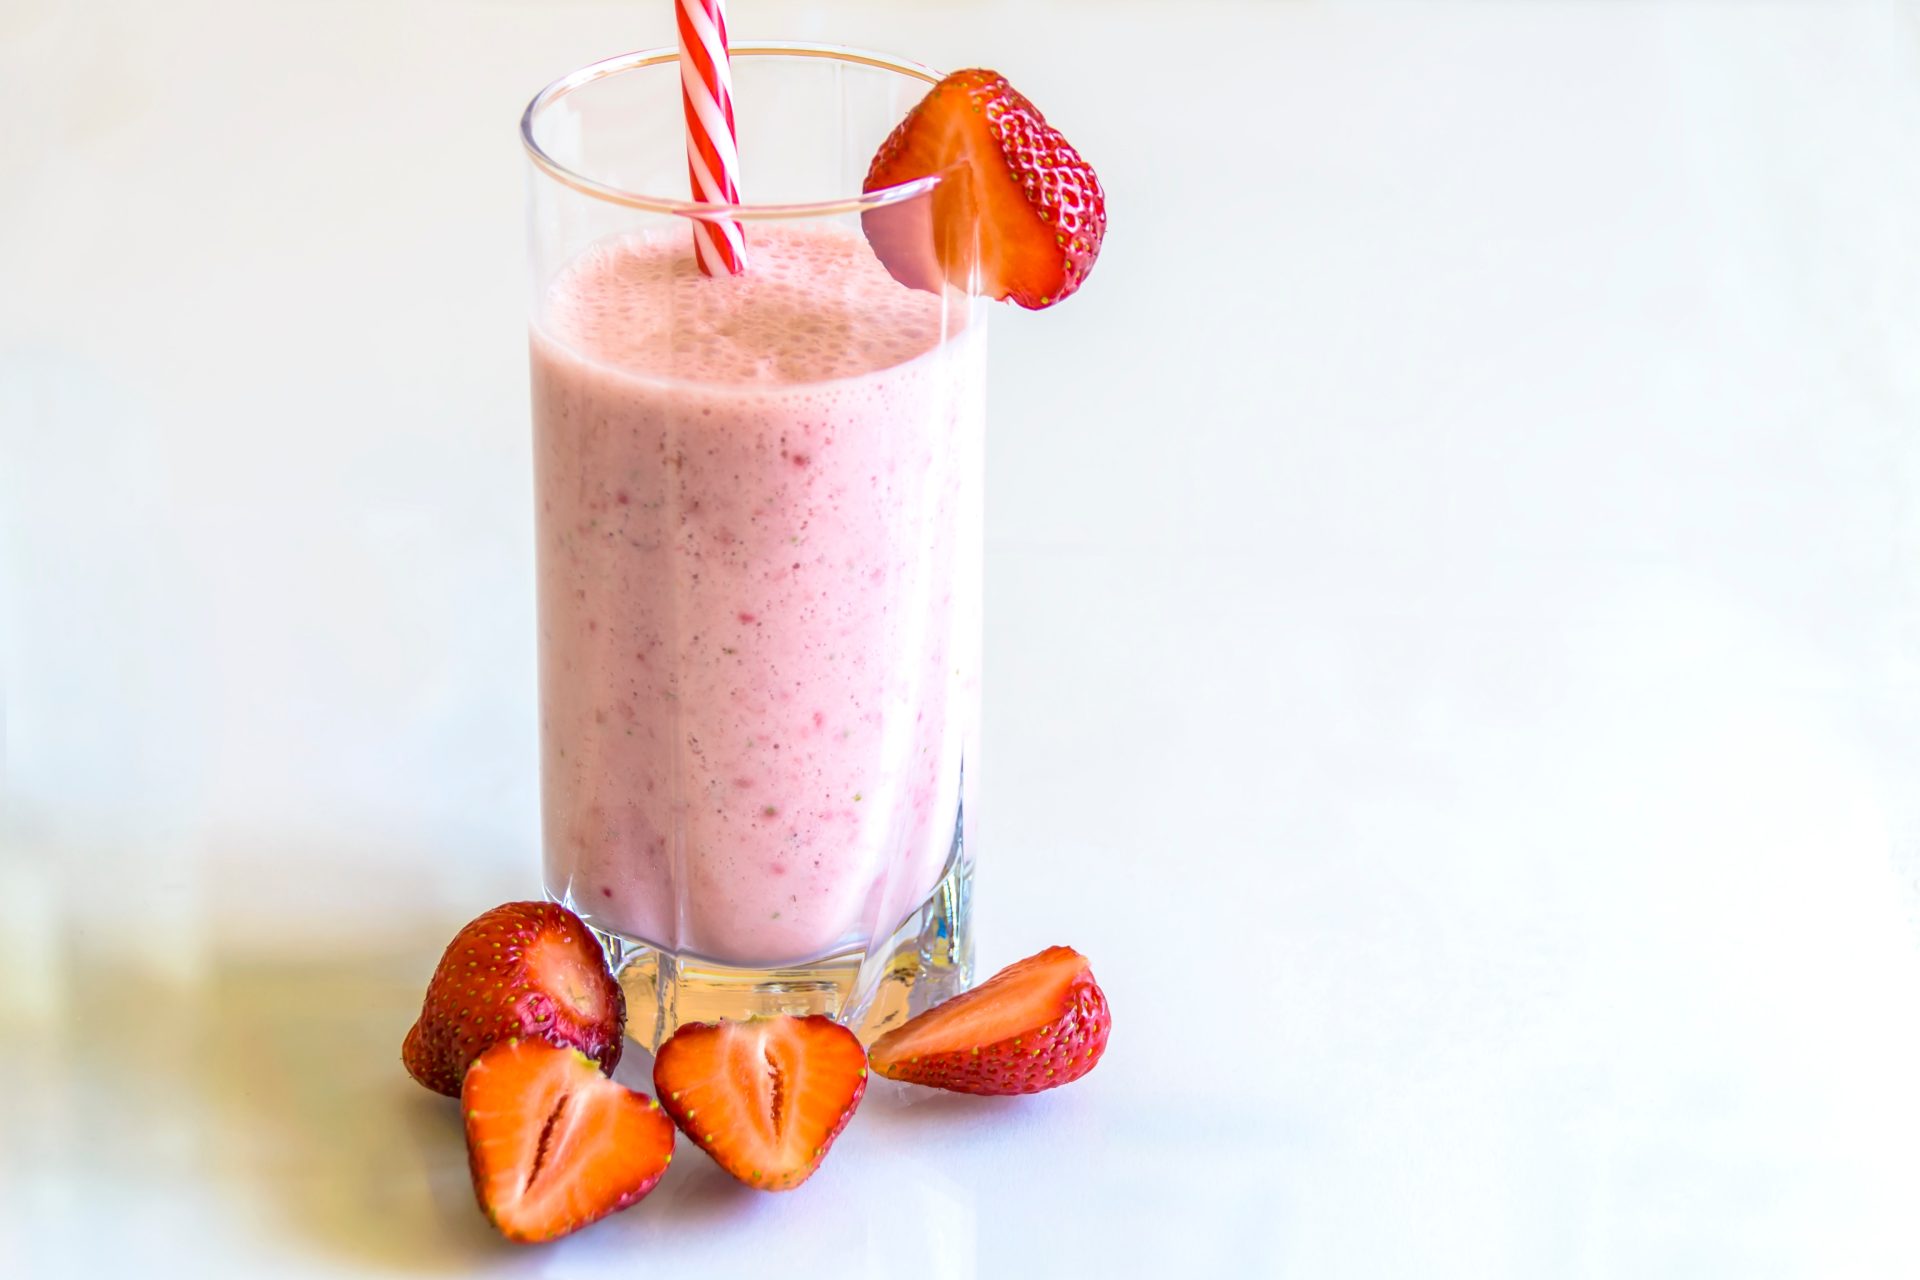 A delicious weight loss smoothie